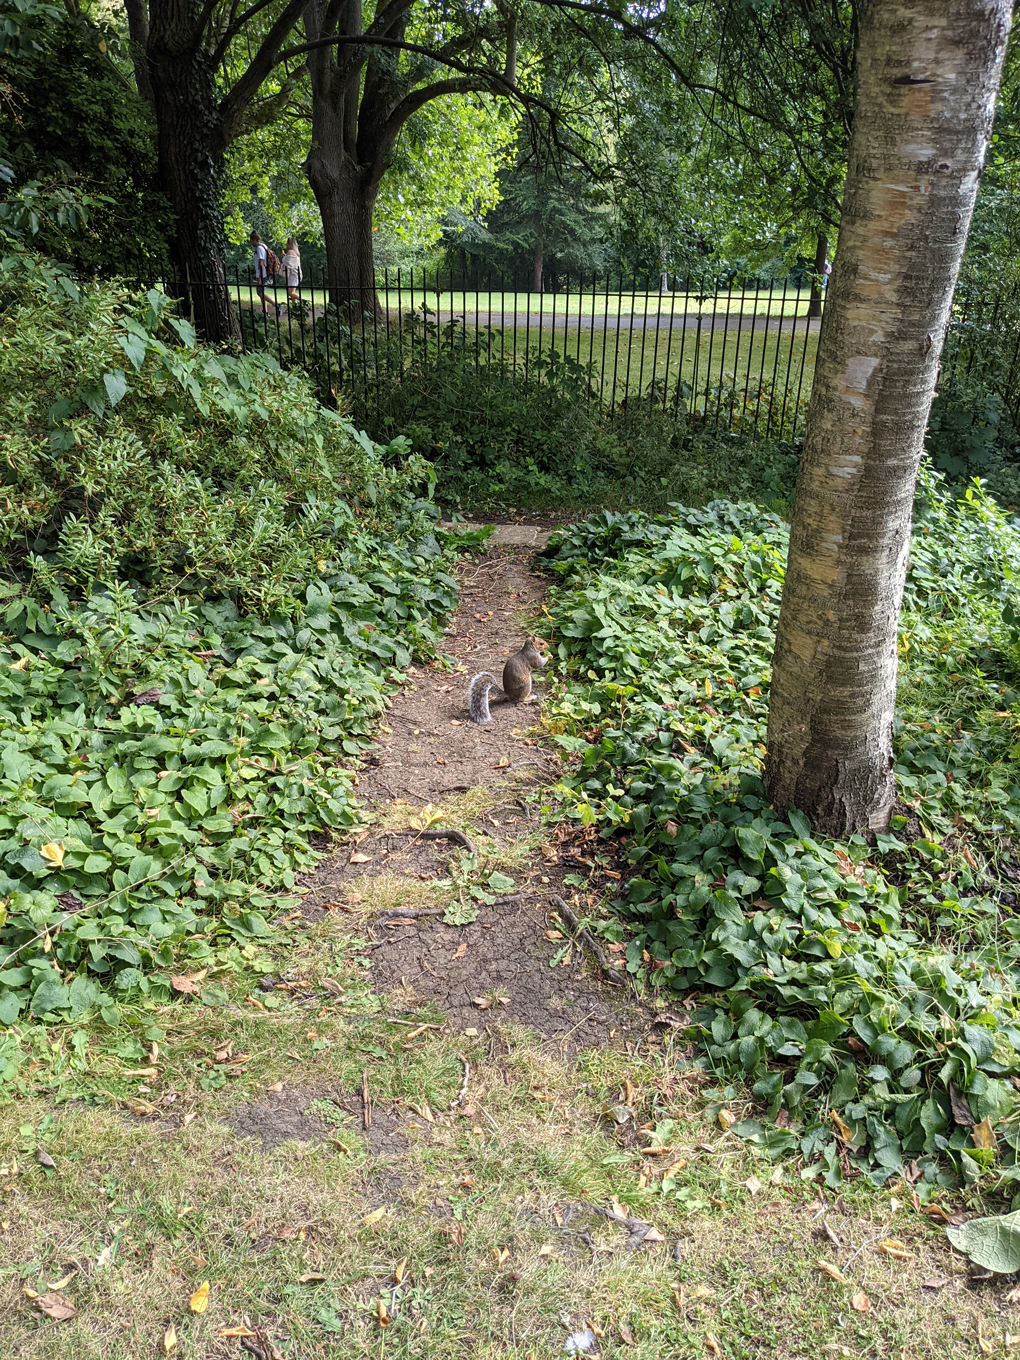 A squirrel surrounded by green plants